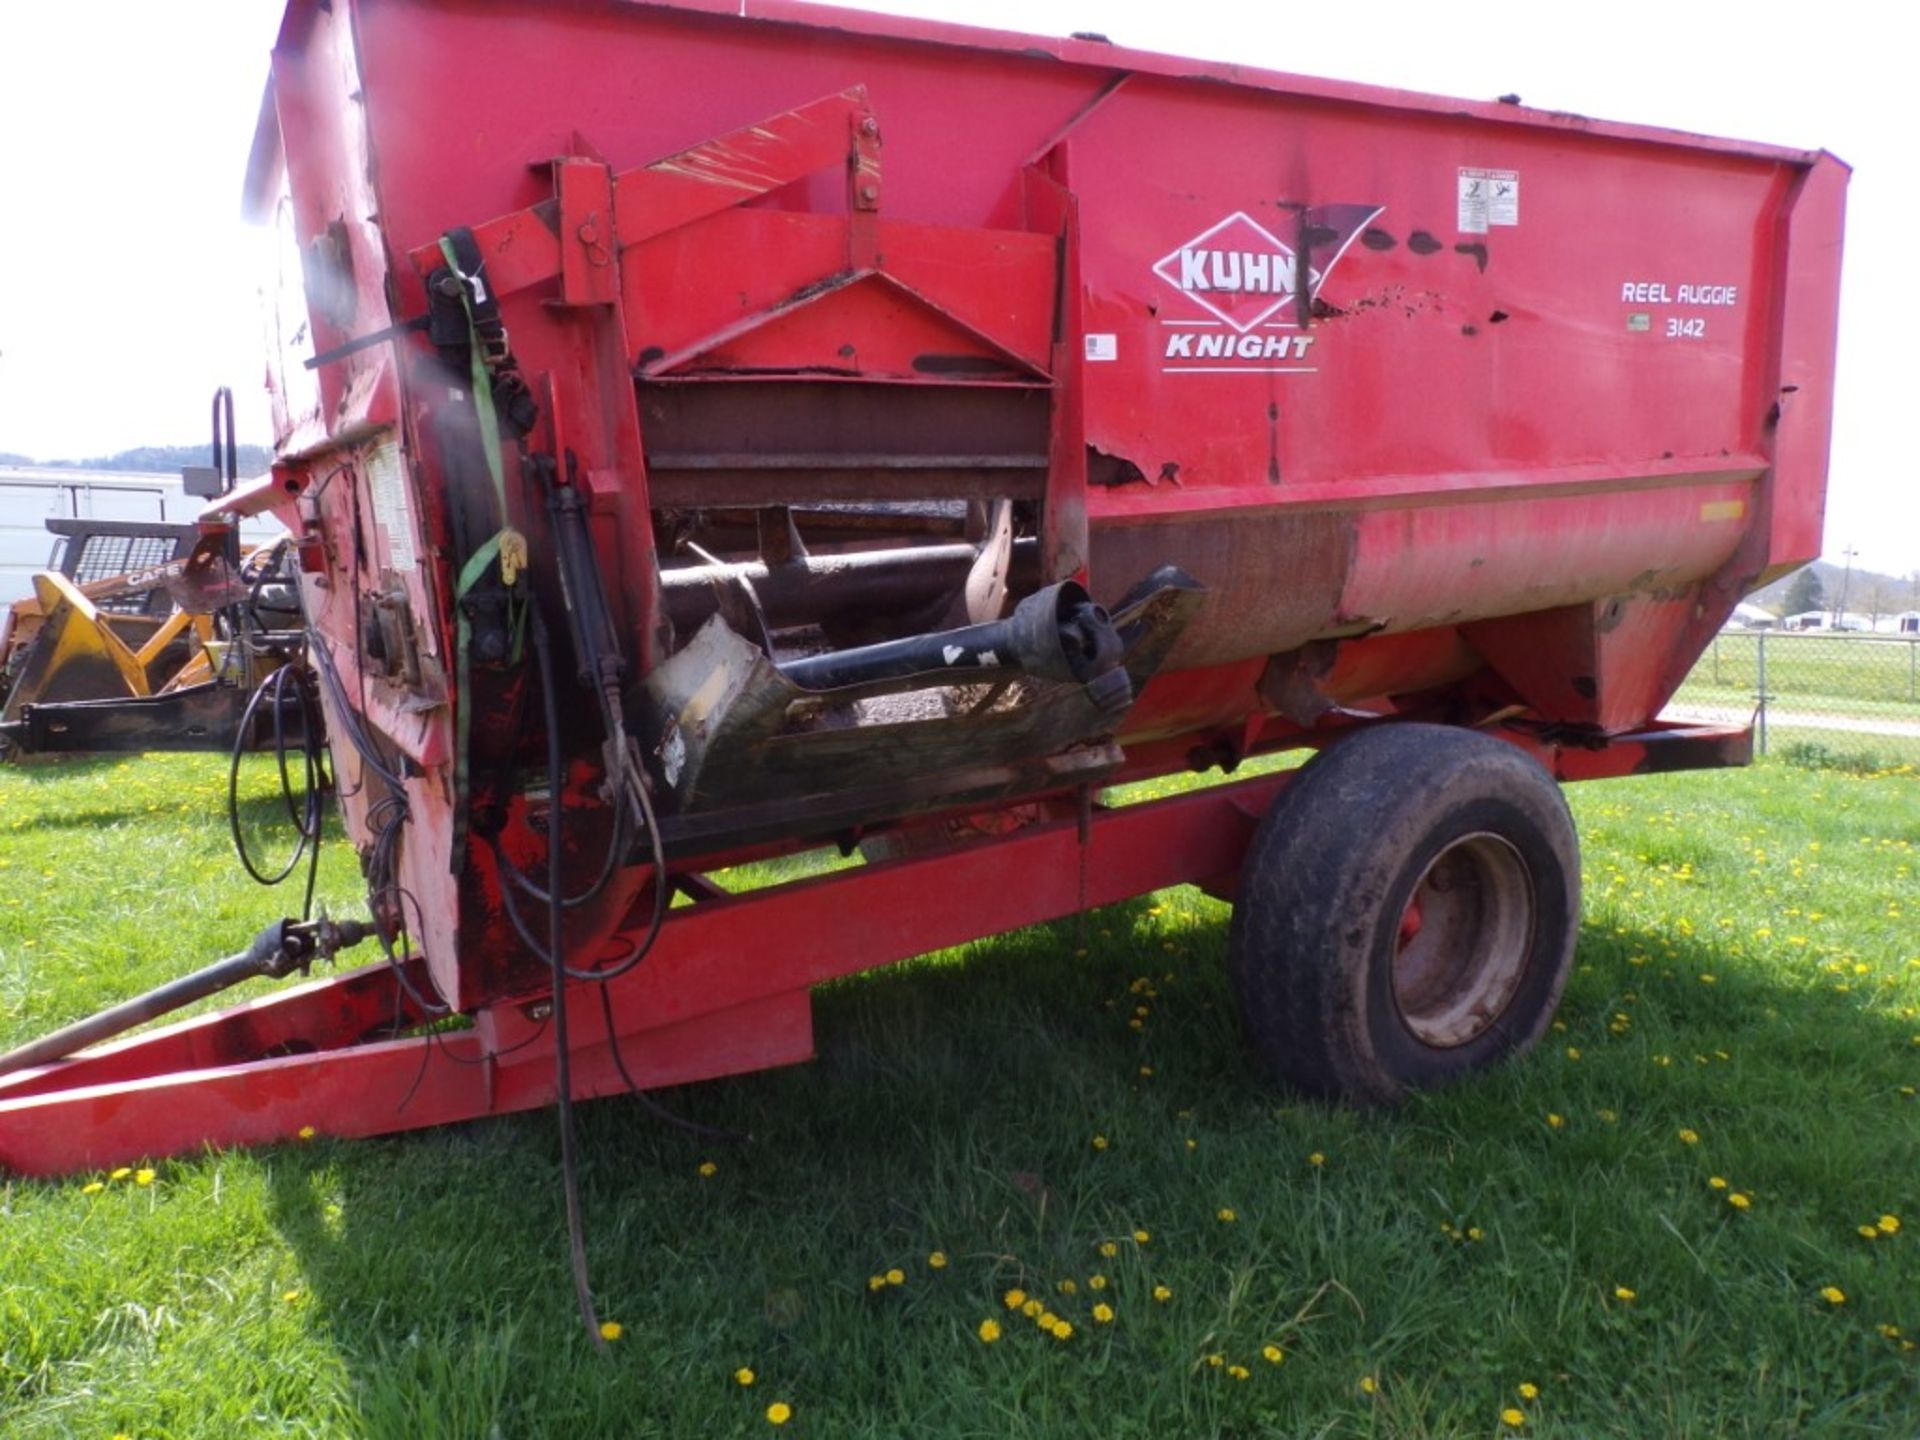 Knight 3142 Mixer Wagon, Orange, Tub Has Been Welded, Rough Shape, No Scales (4338) - Image 2 of 4